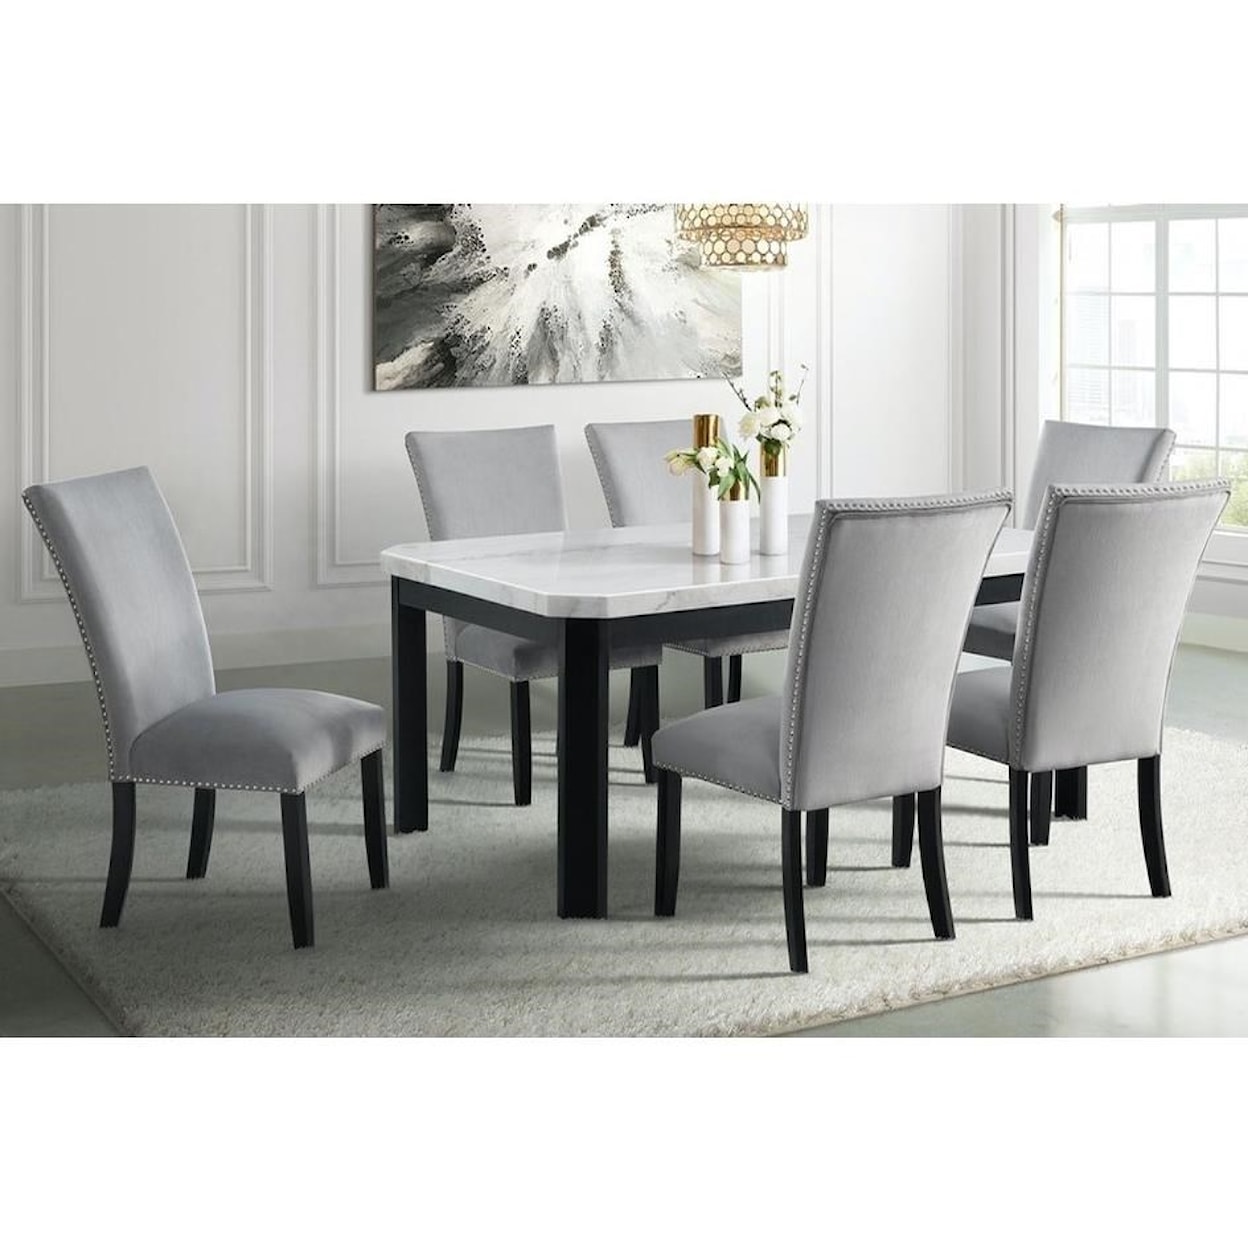 Elements International Valentino 7-Piece Dining Table and Chair Set